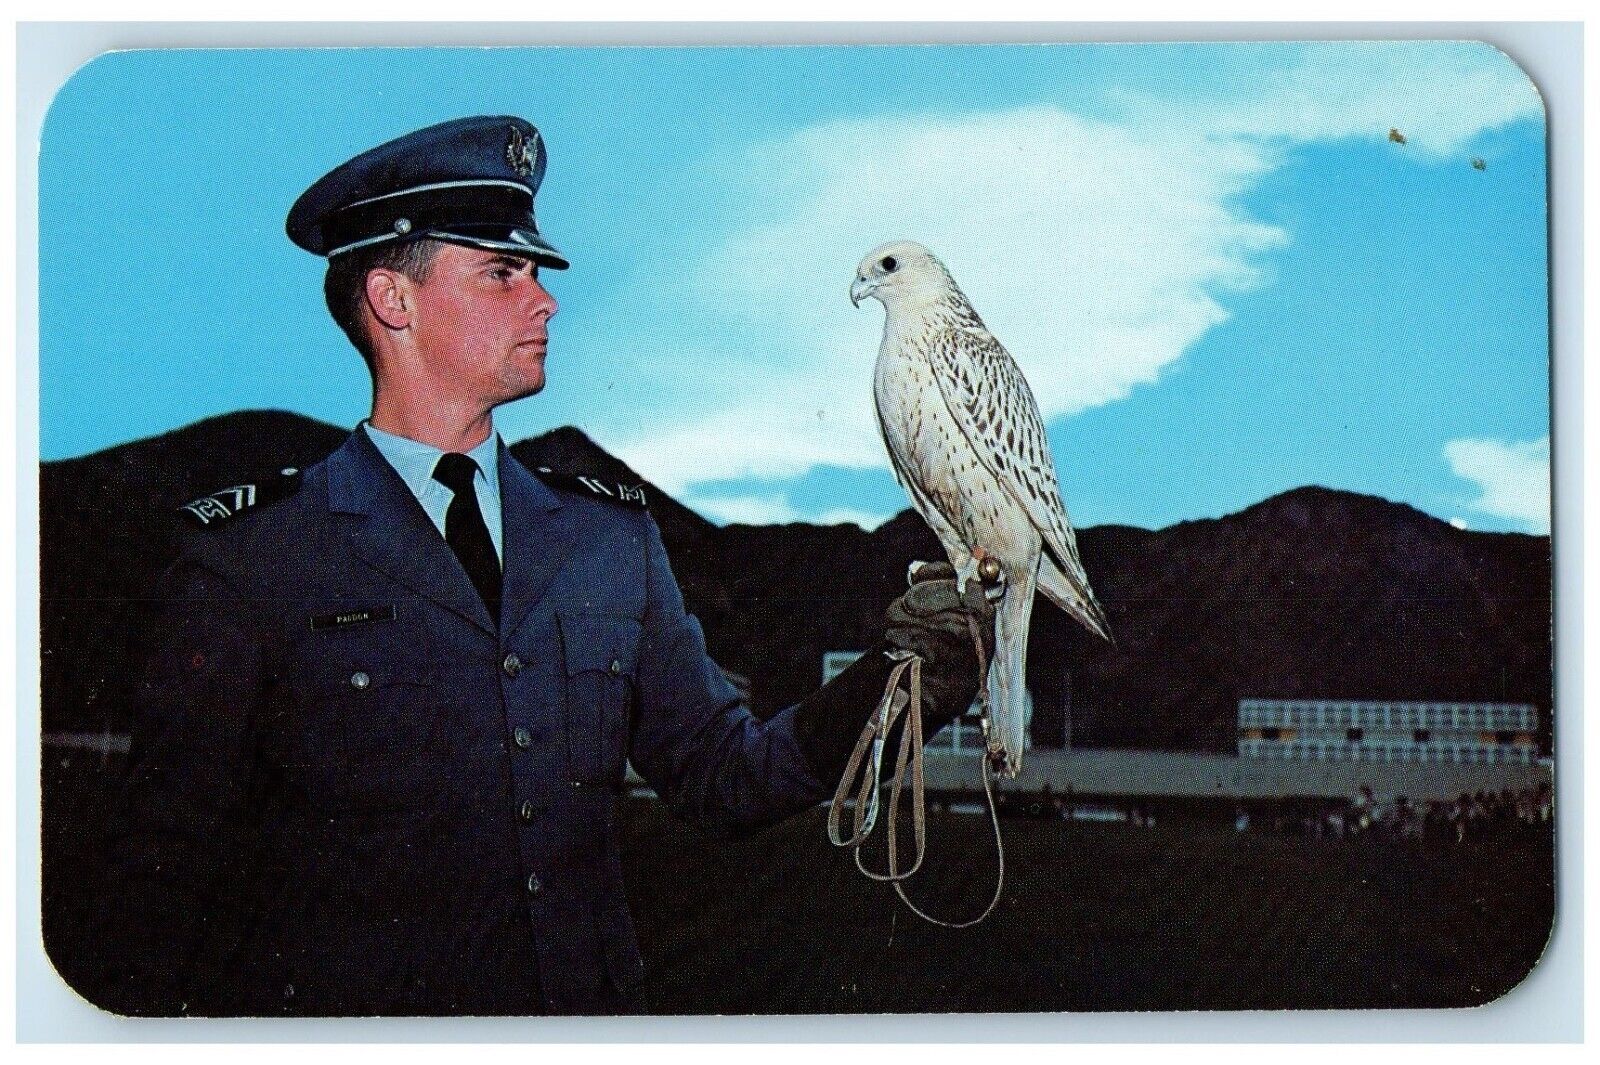 c1960's Cadet And Falcon US Air Force Academy Pike Peaks Colorado CO Postcard